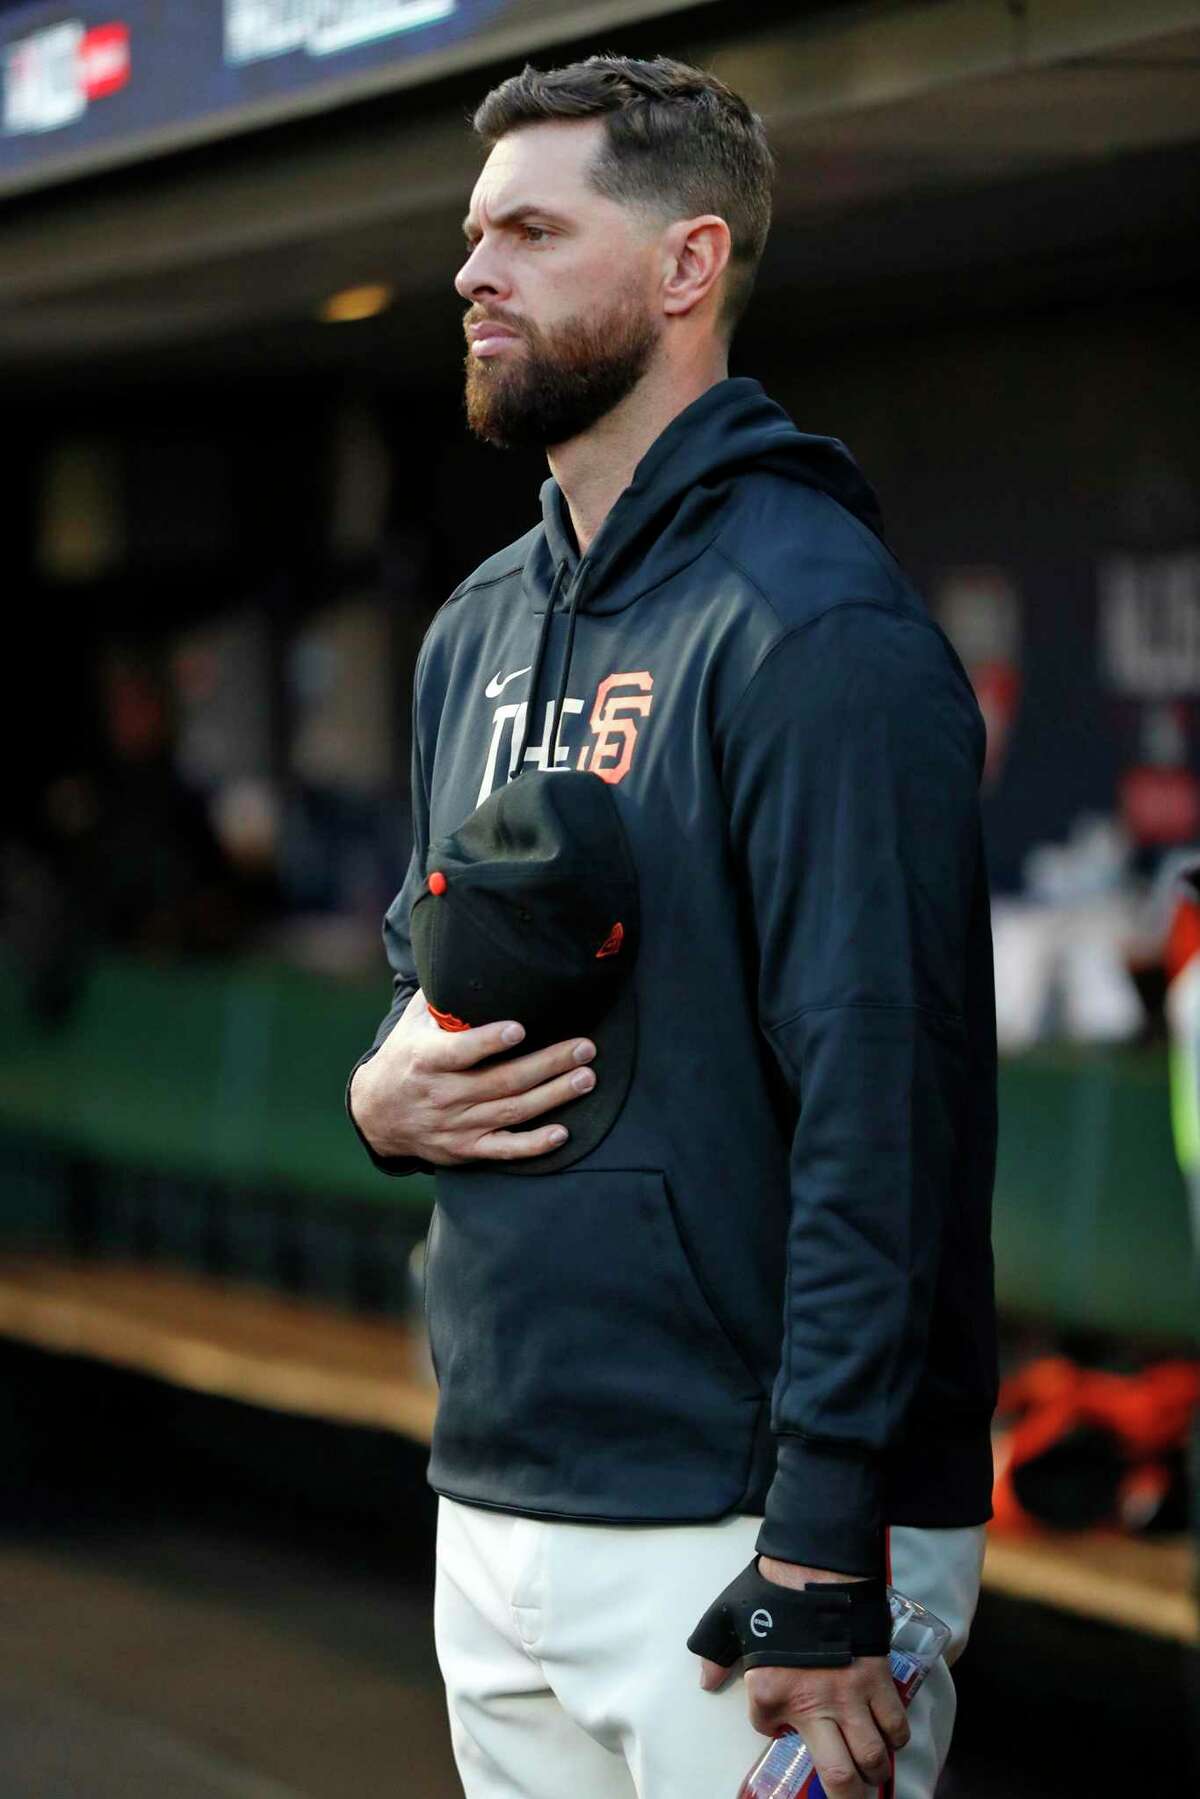 Brandon Belt played in only 97 games for the Giants this season — and missed the NLDS with a broken thumb — but his 29 home runs in those games might have made his price tag too high for the Giants.